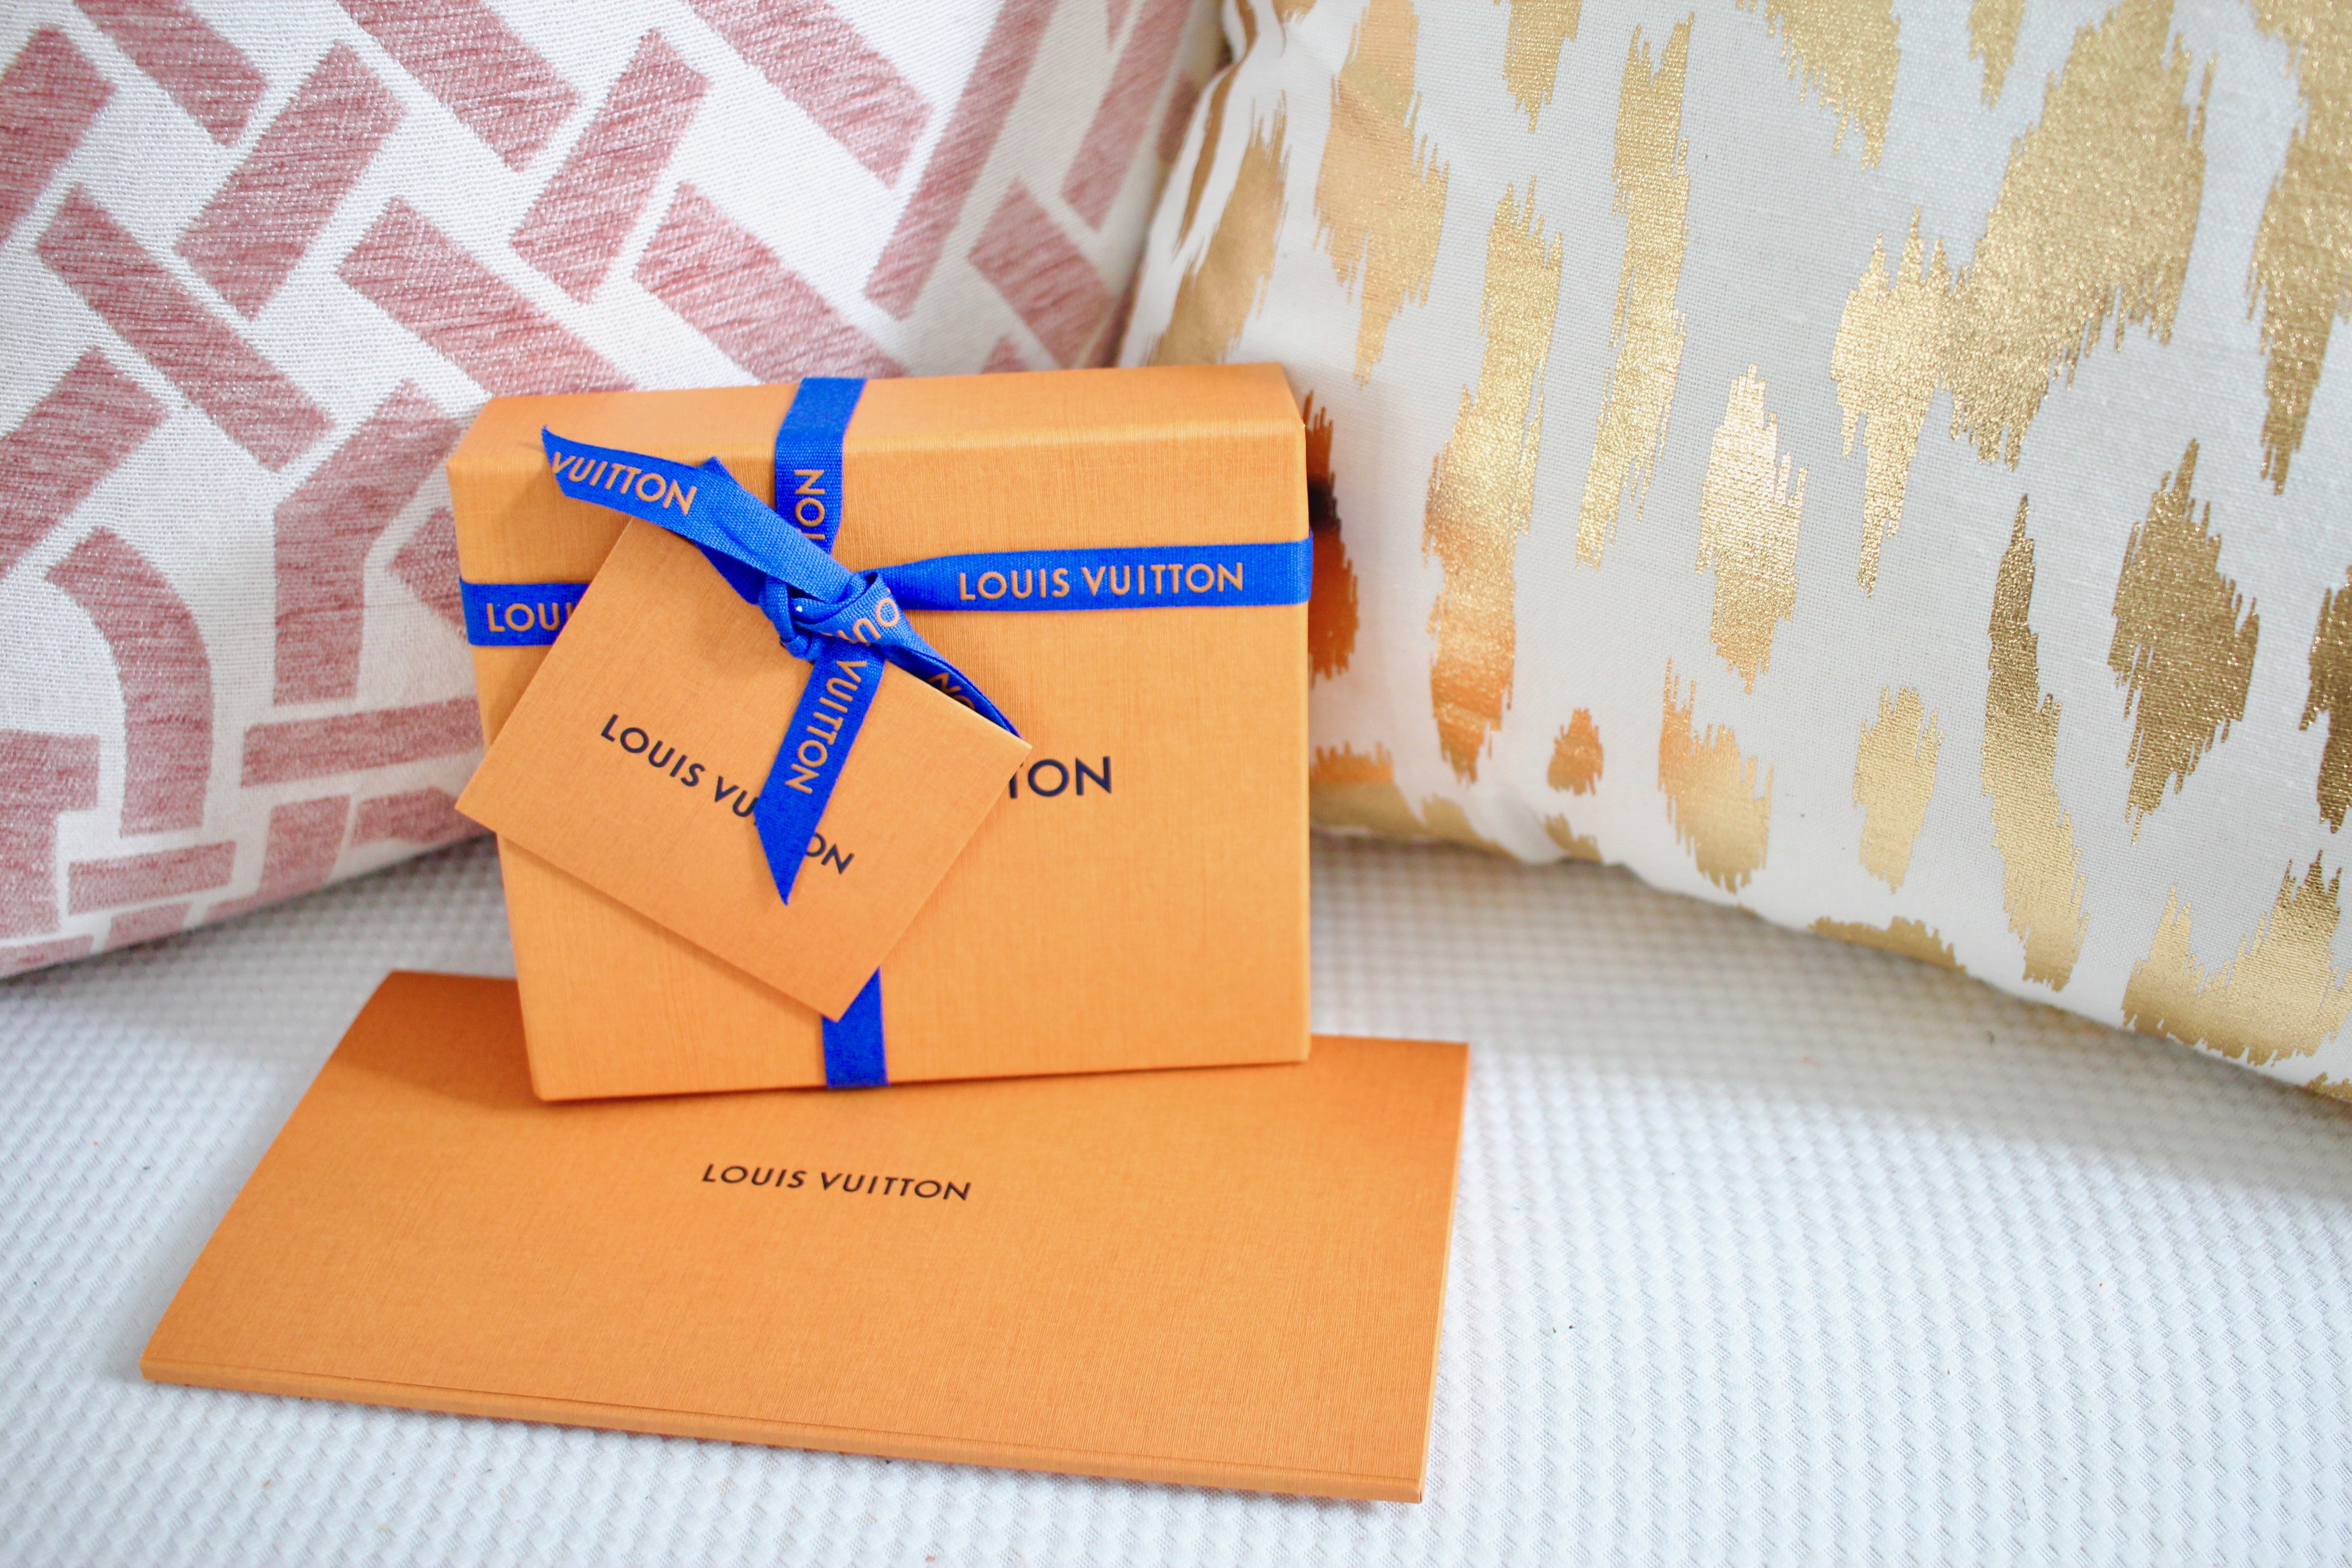 Louis Vuitton Gift Box and LV Ribbon with tag  Louis vuitton gifts, Louis  vuitton, Gift box